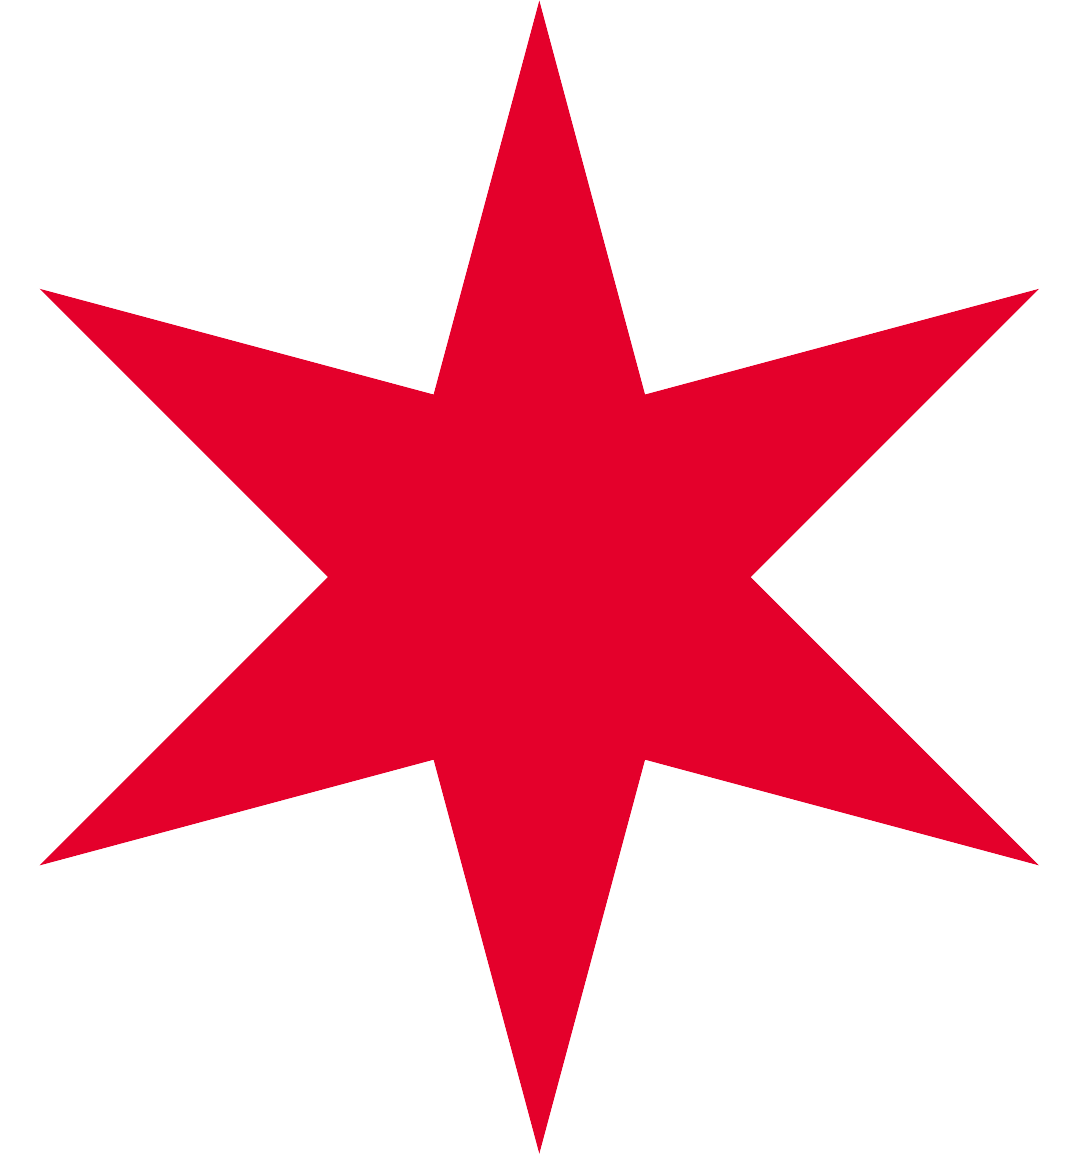 A red star is shown on the green background.